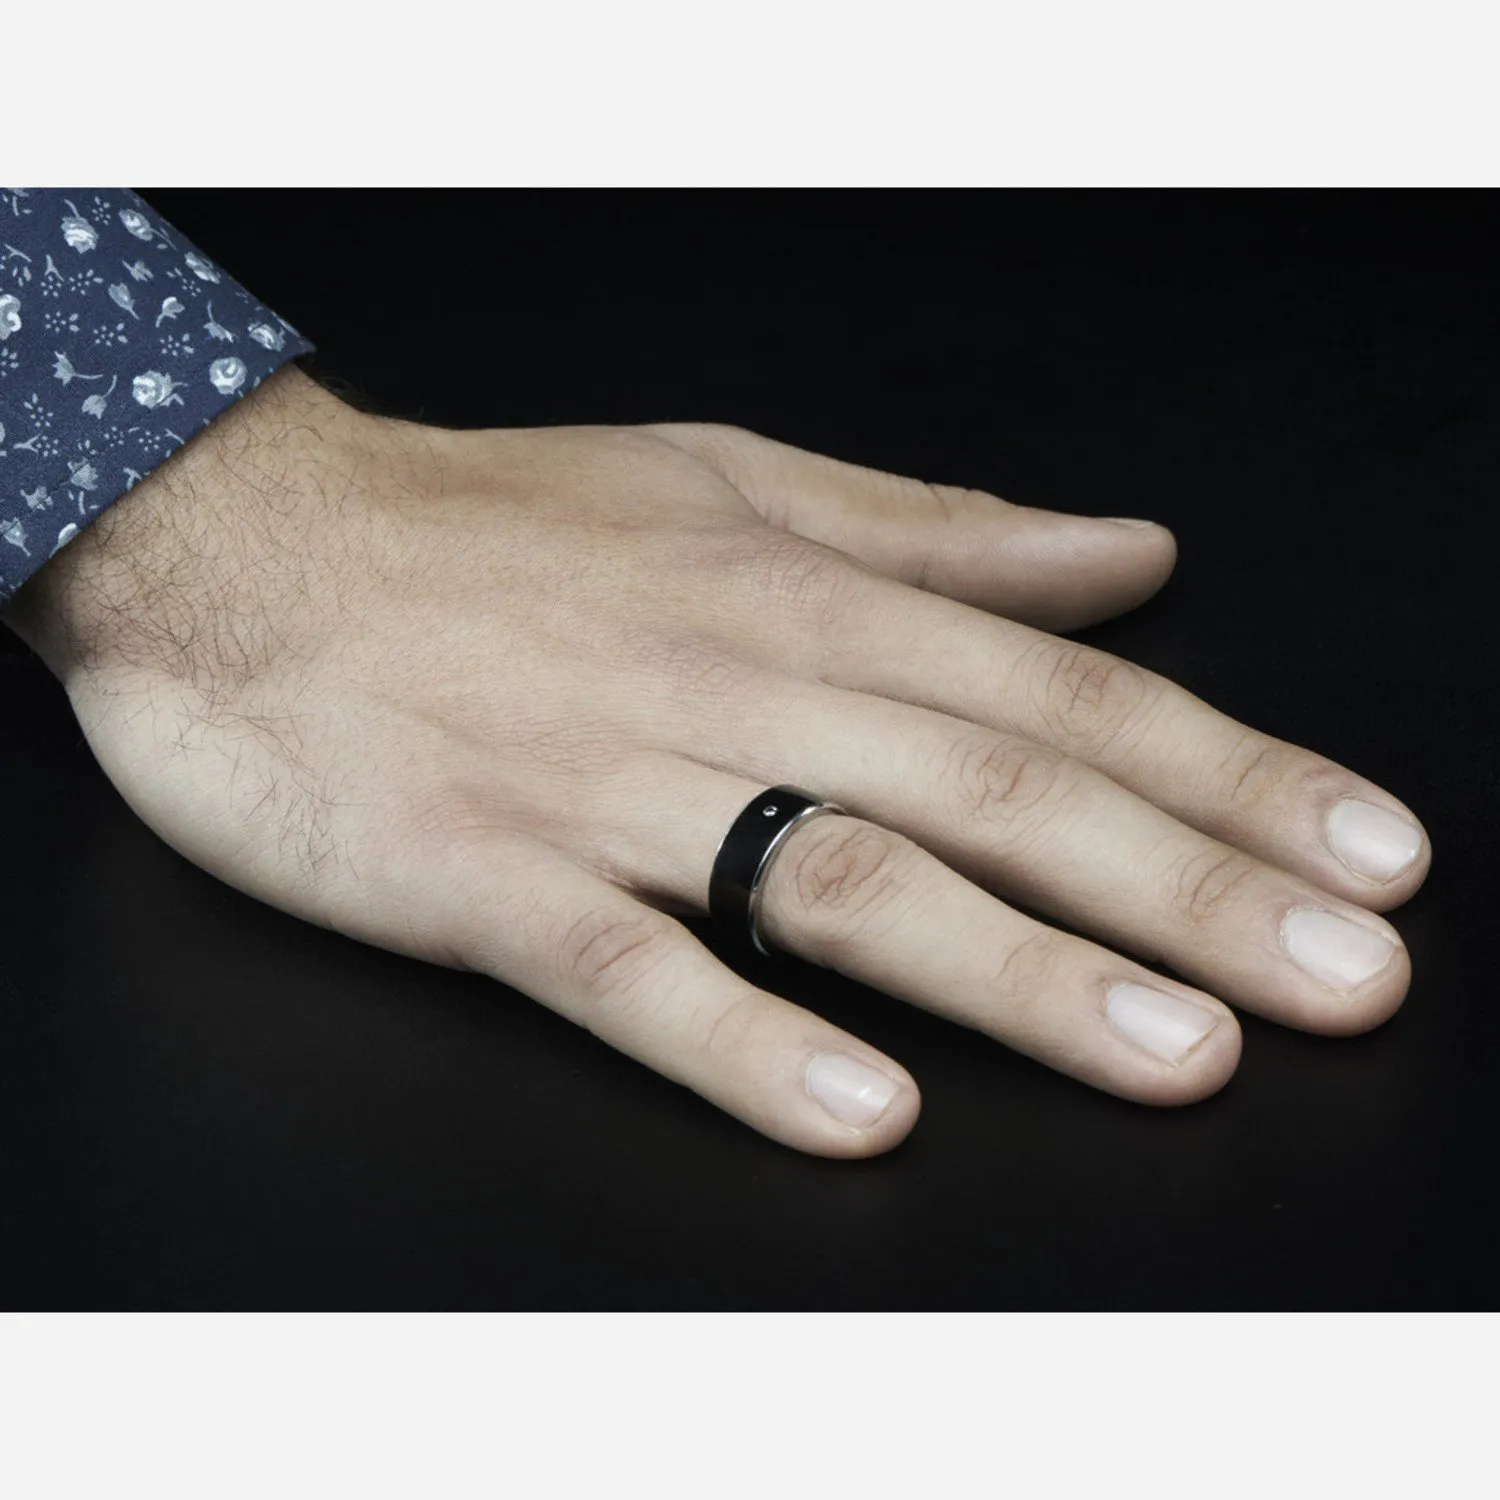 Photo of RFID / NFC Smart Ring - Size 8 - NTAG213